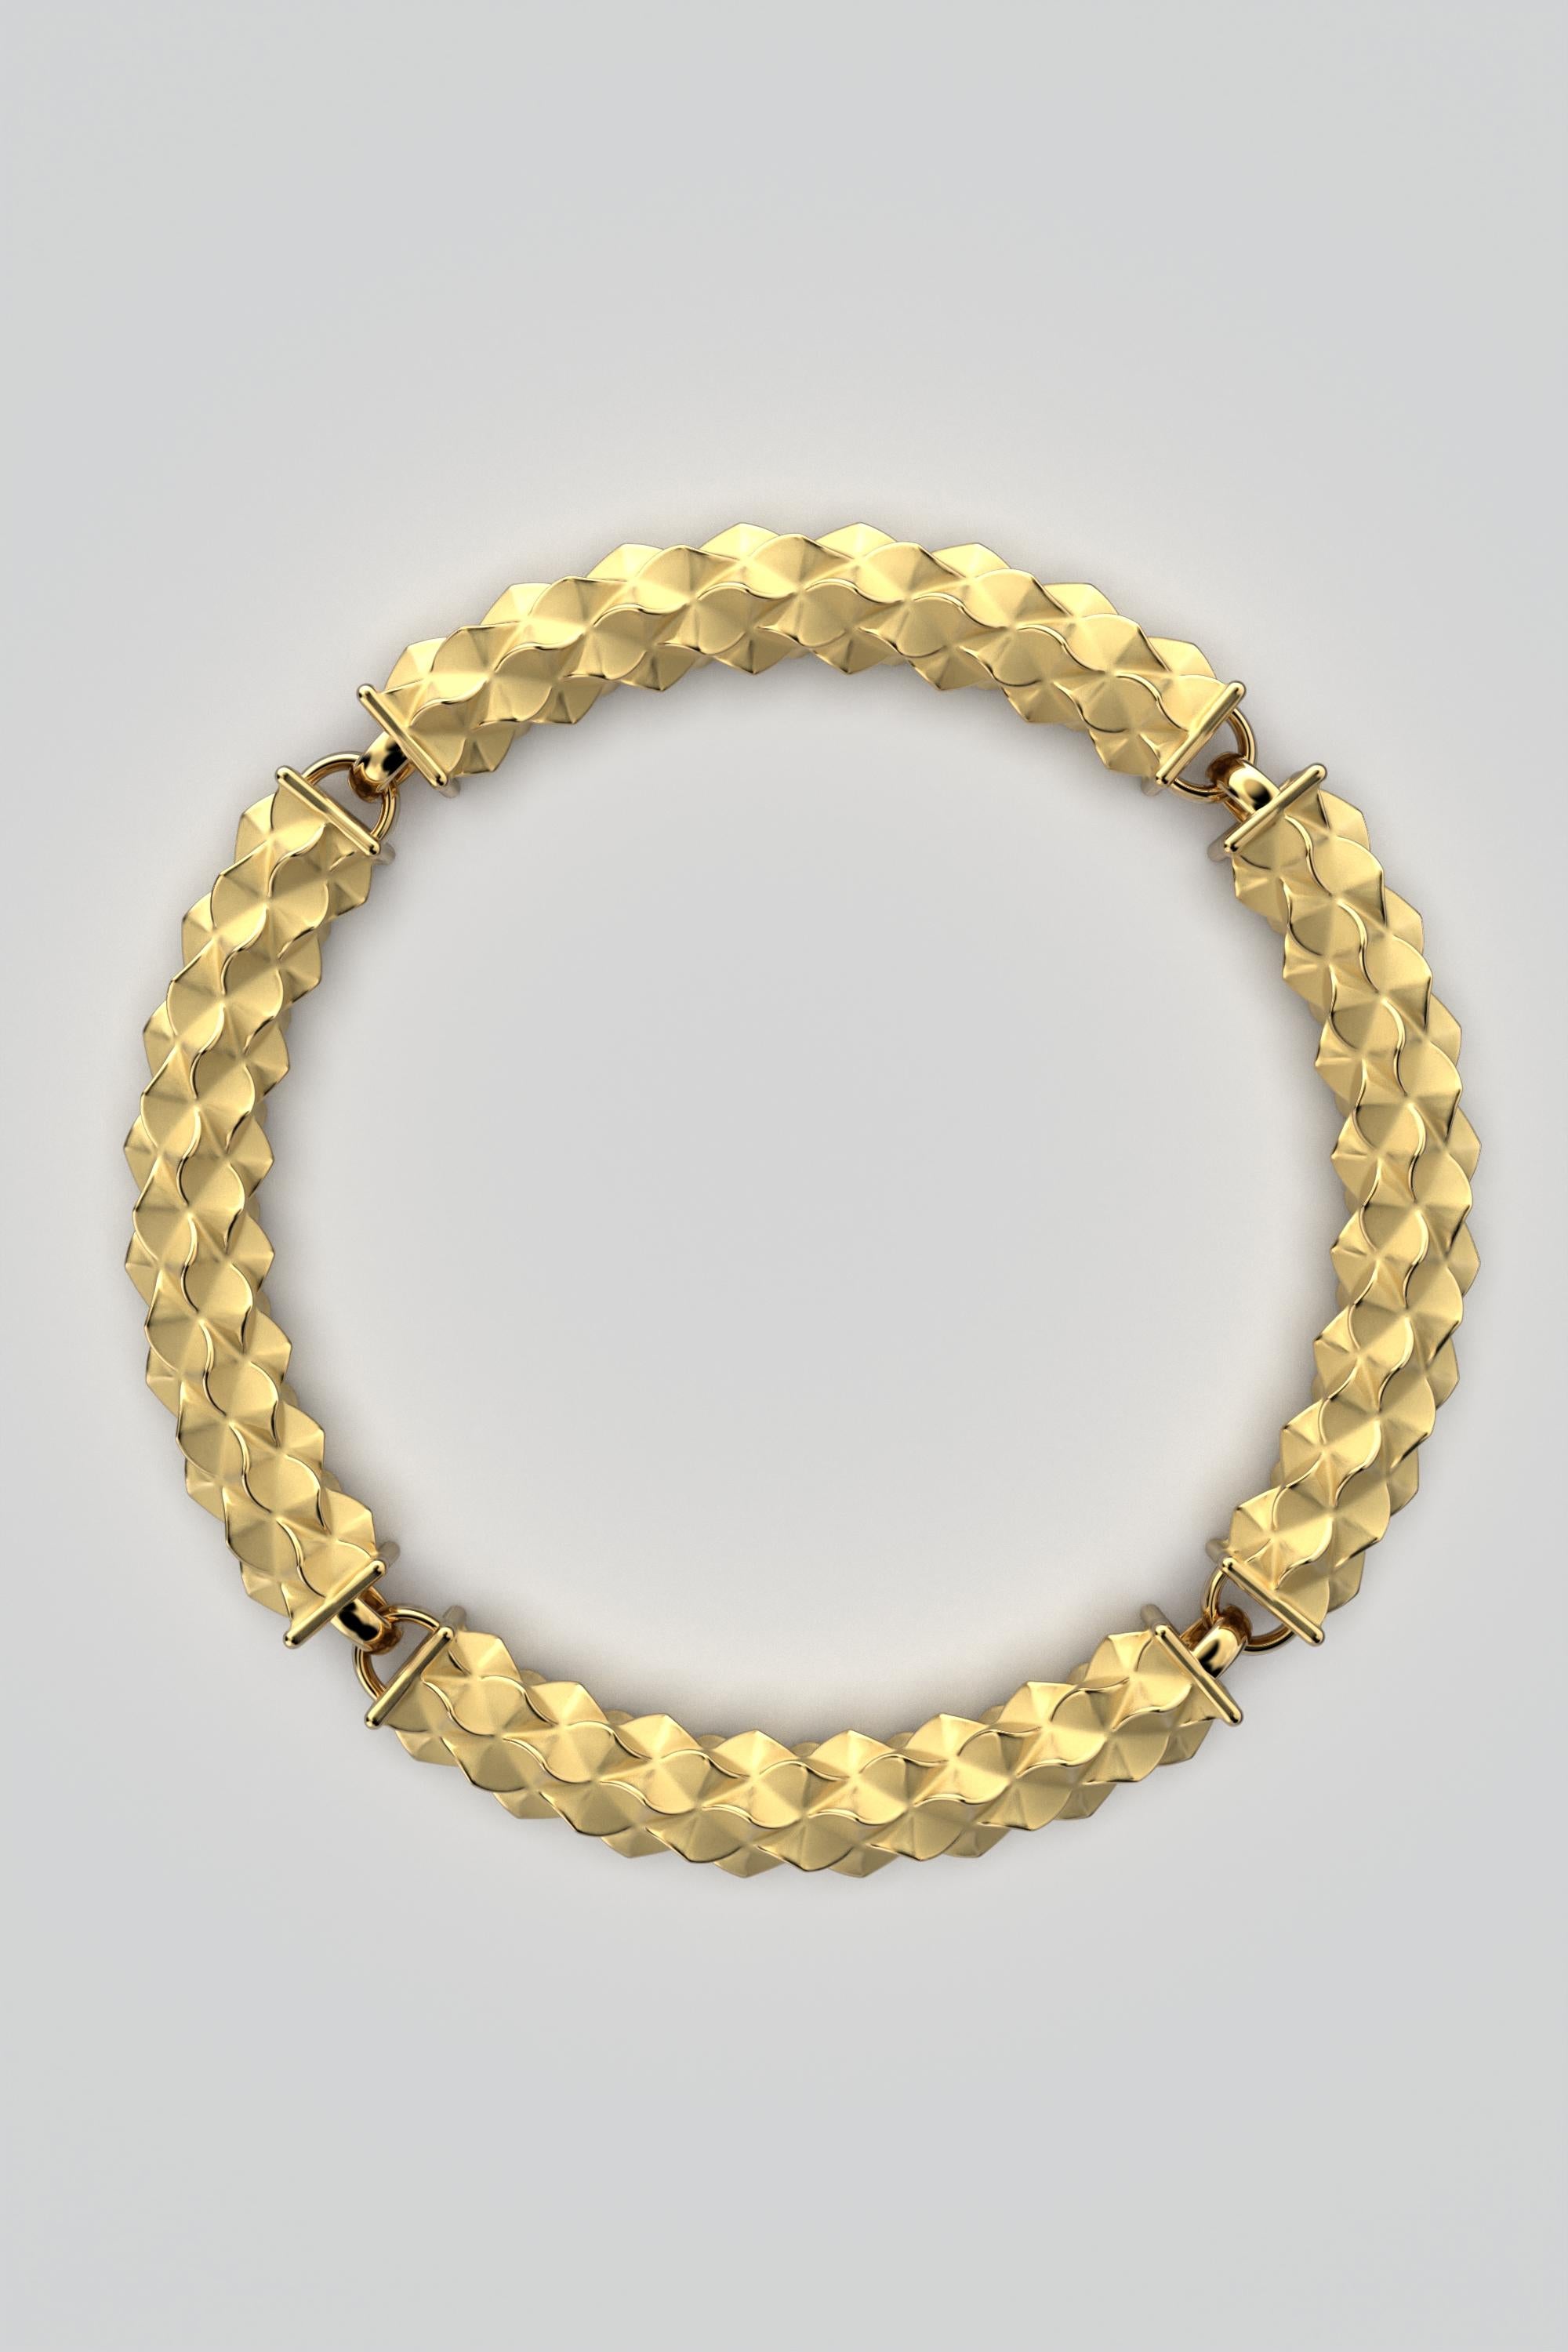 Stunning Made to order 14k Gold Desert Dunes Bracelet

Elevate your style with the epitome of luxury and craftsmanship – our semi-rigid gold bracelet, expertly designed and produced exclusively to order in the heart of Italy. Crafted to perfection,